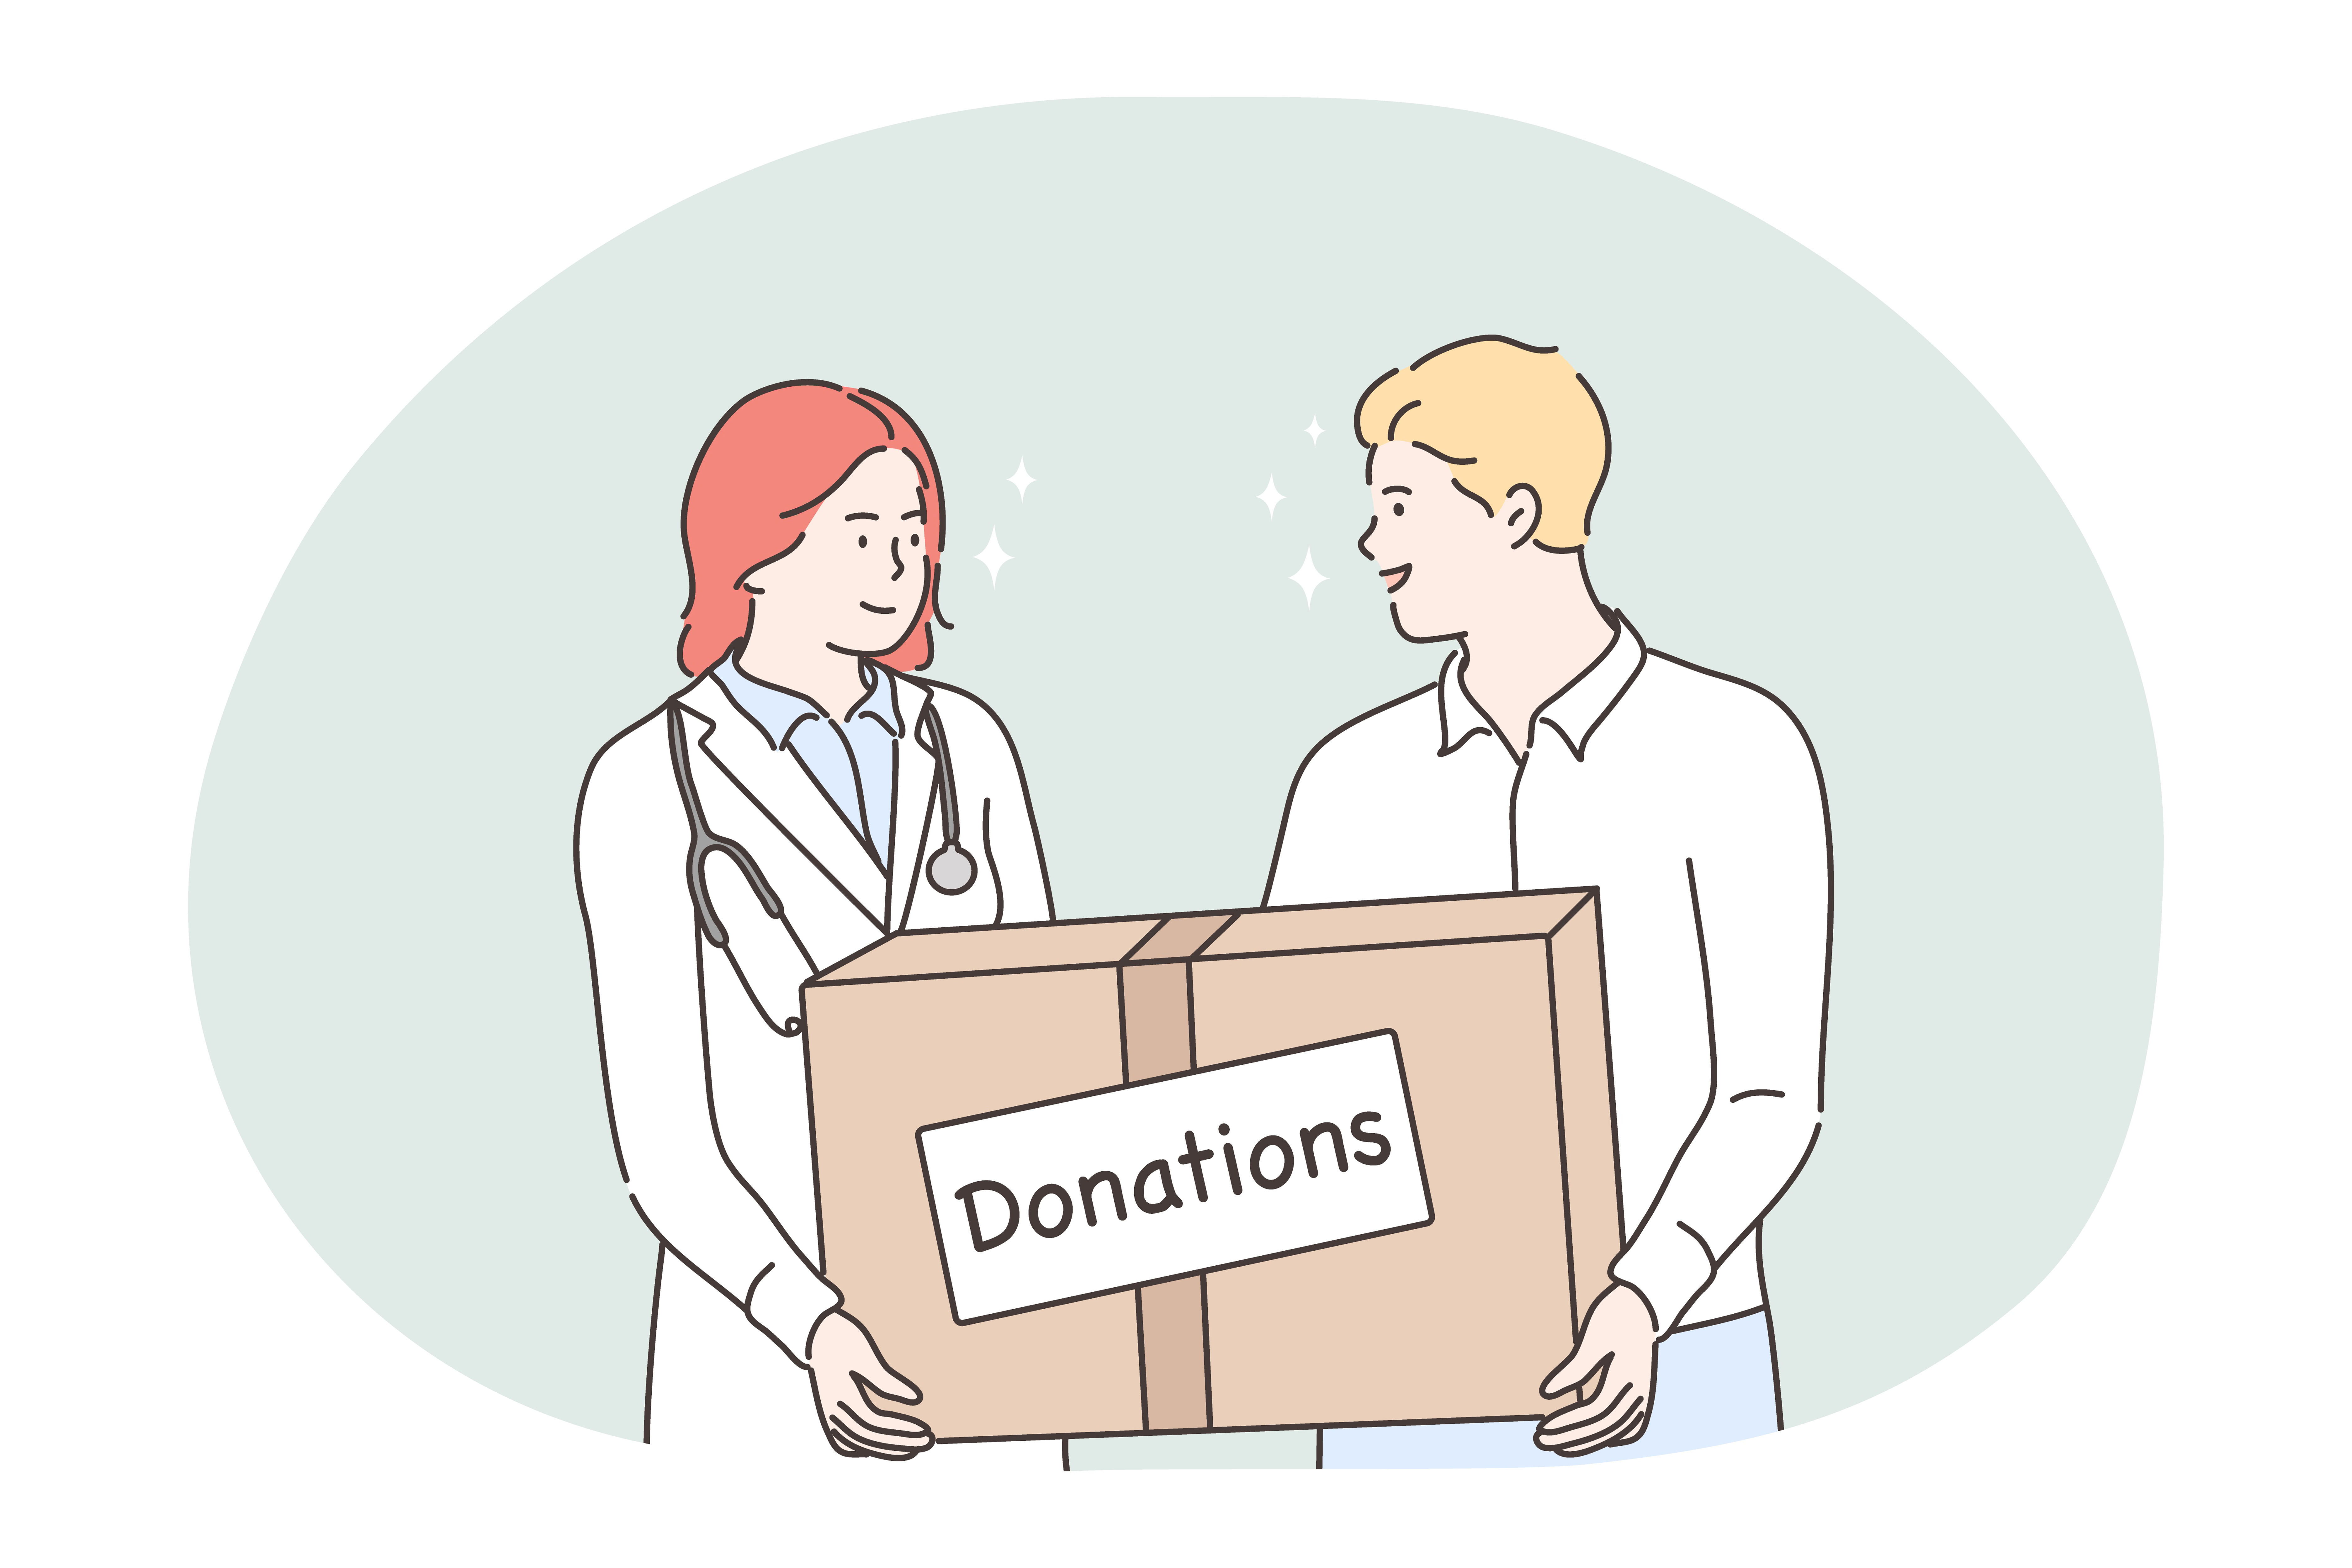 Donation, charity, humanitarian help concept. Young woman doctor and man volunteer cartoon characters standing and holding big box with donations in hands. Volunteering, support, assistance . Donation, charity, humanitarian help concept